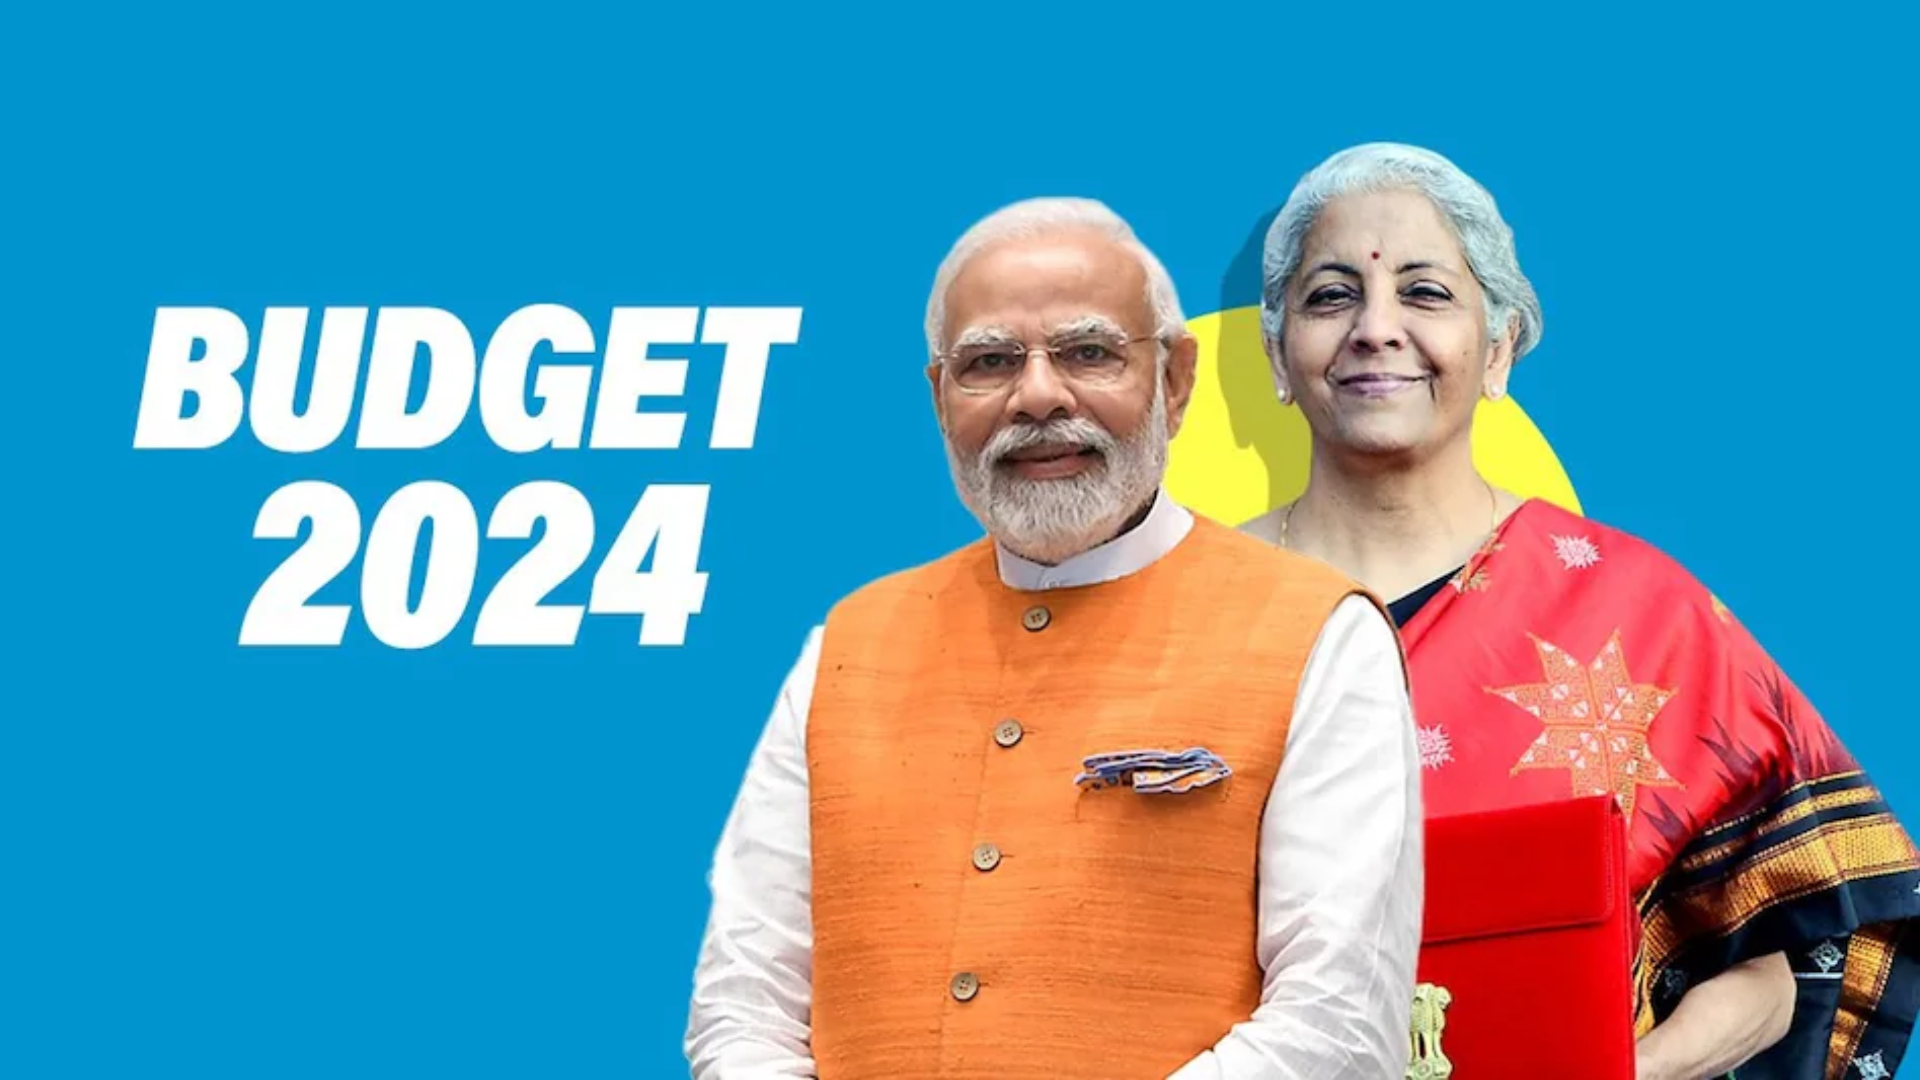 Will the Budget 2024 Make You Richer or Poorer? Key Factors That Will Affect Your Finances